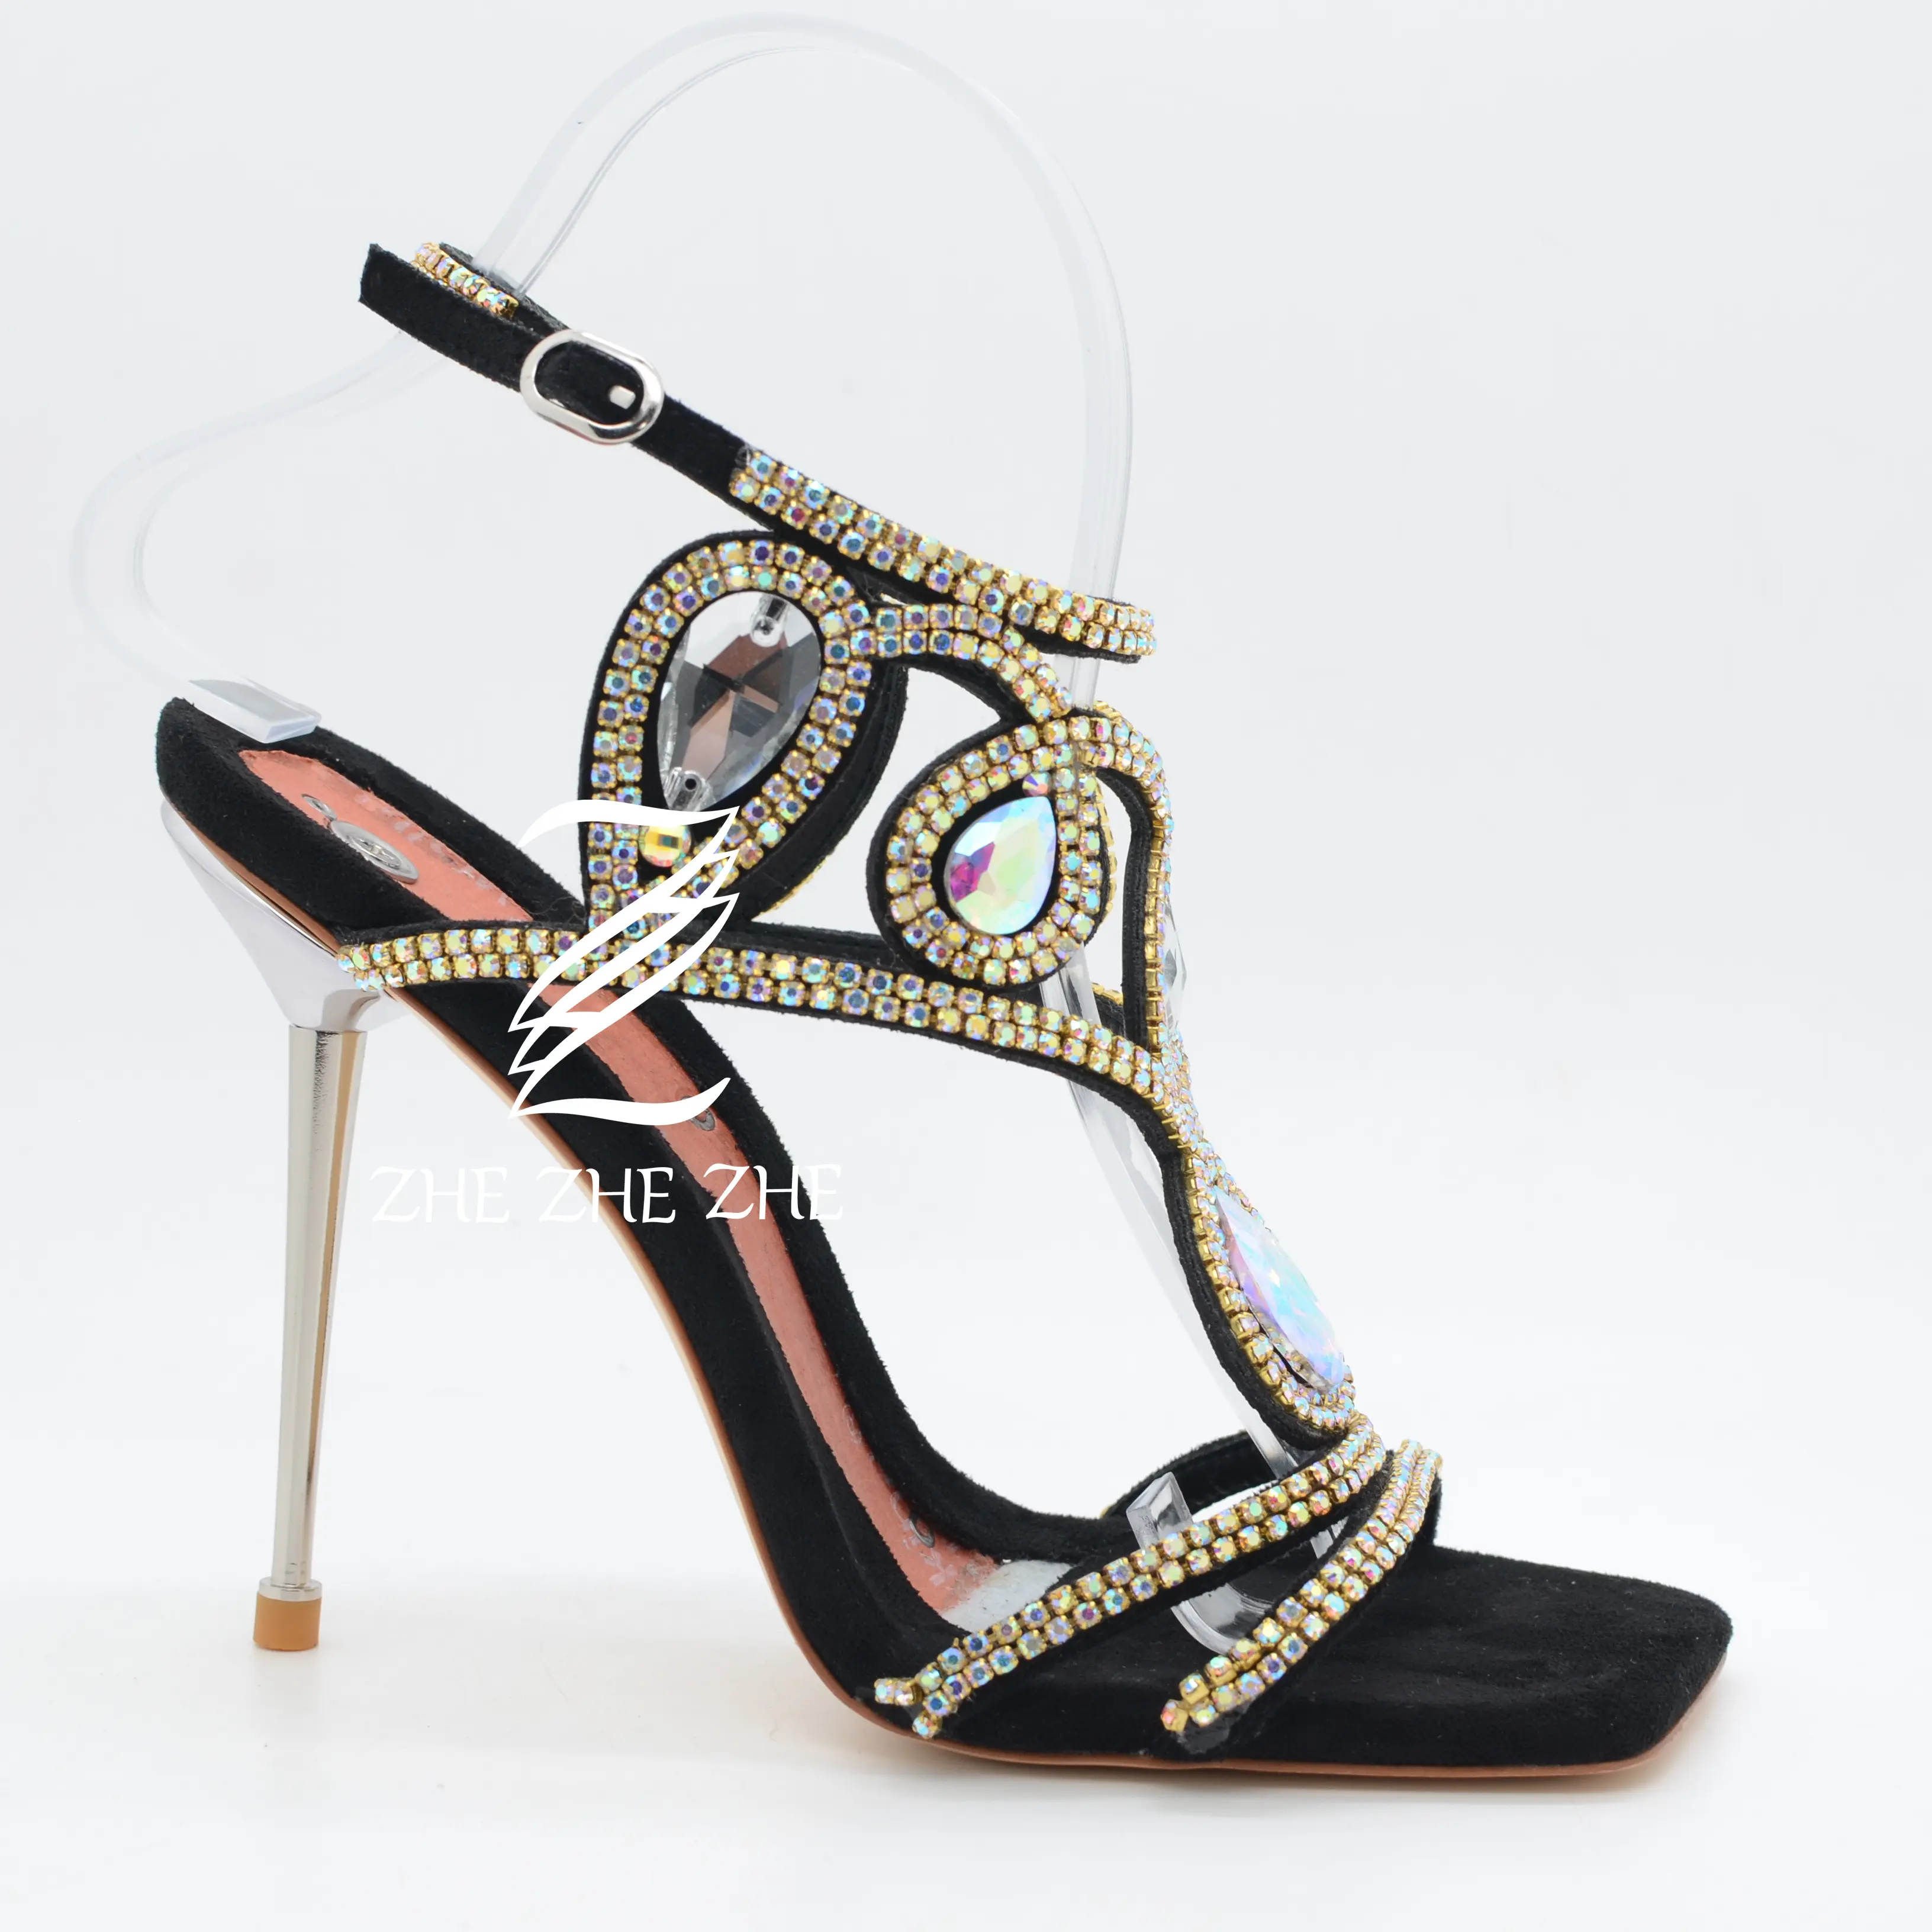 Net Red Style Hot Selling Fashion Colored Rhinestone Black Square Toe Heeled Sandals Metal Heel Party Sexy High Heels Shoes